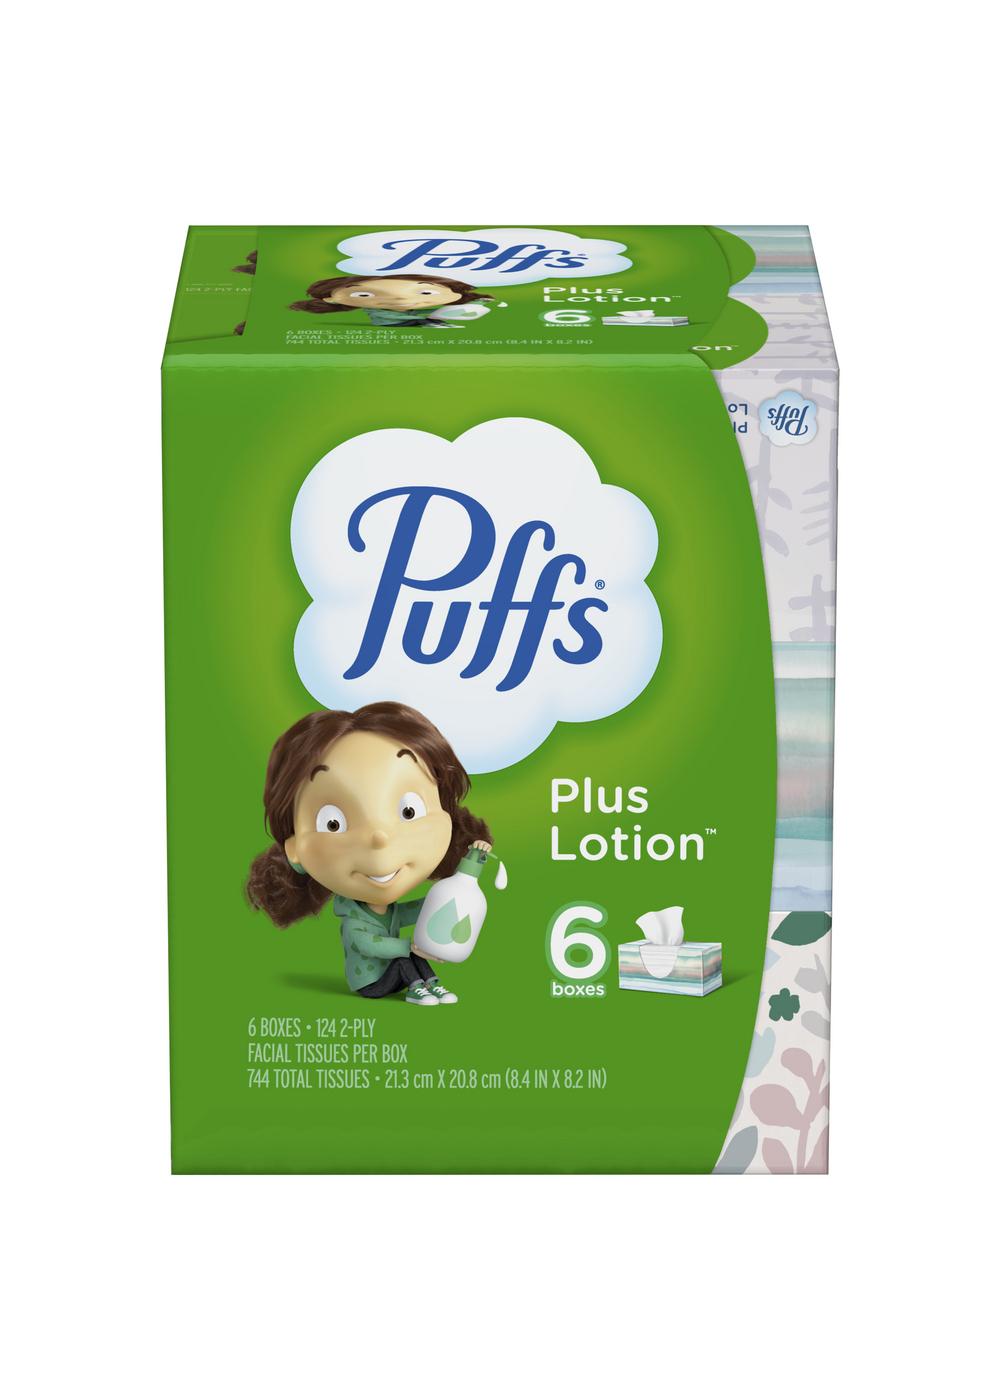 Puffs Plus Lotion Facial Tissues 6 pk; image 1 of 8